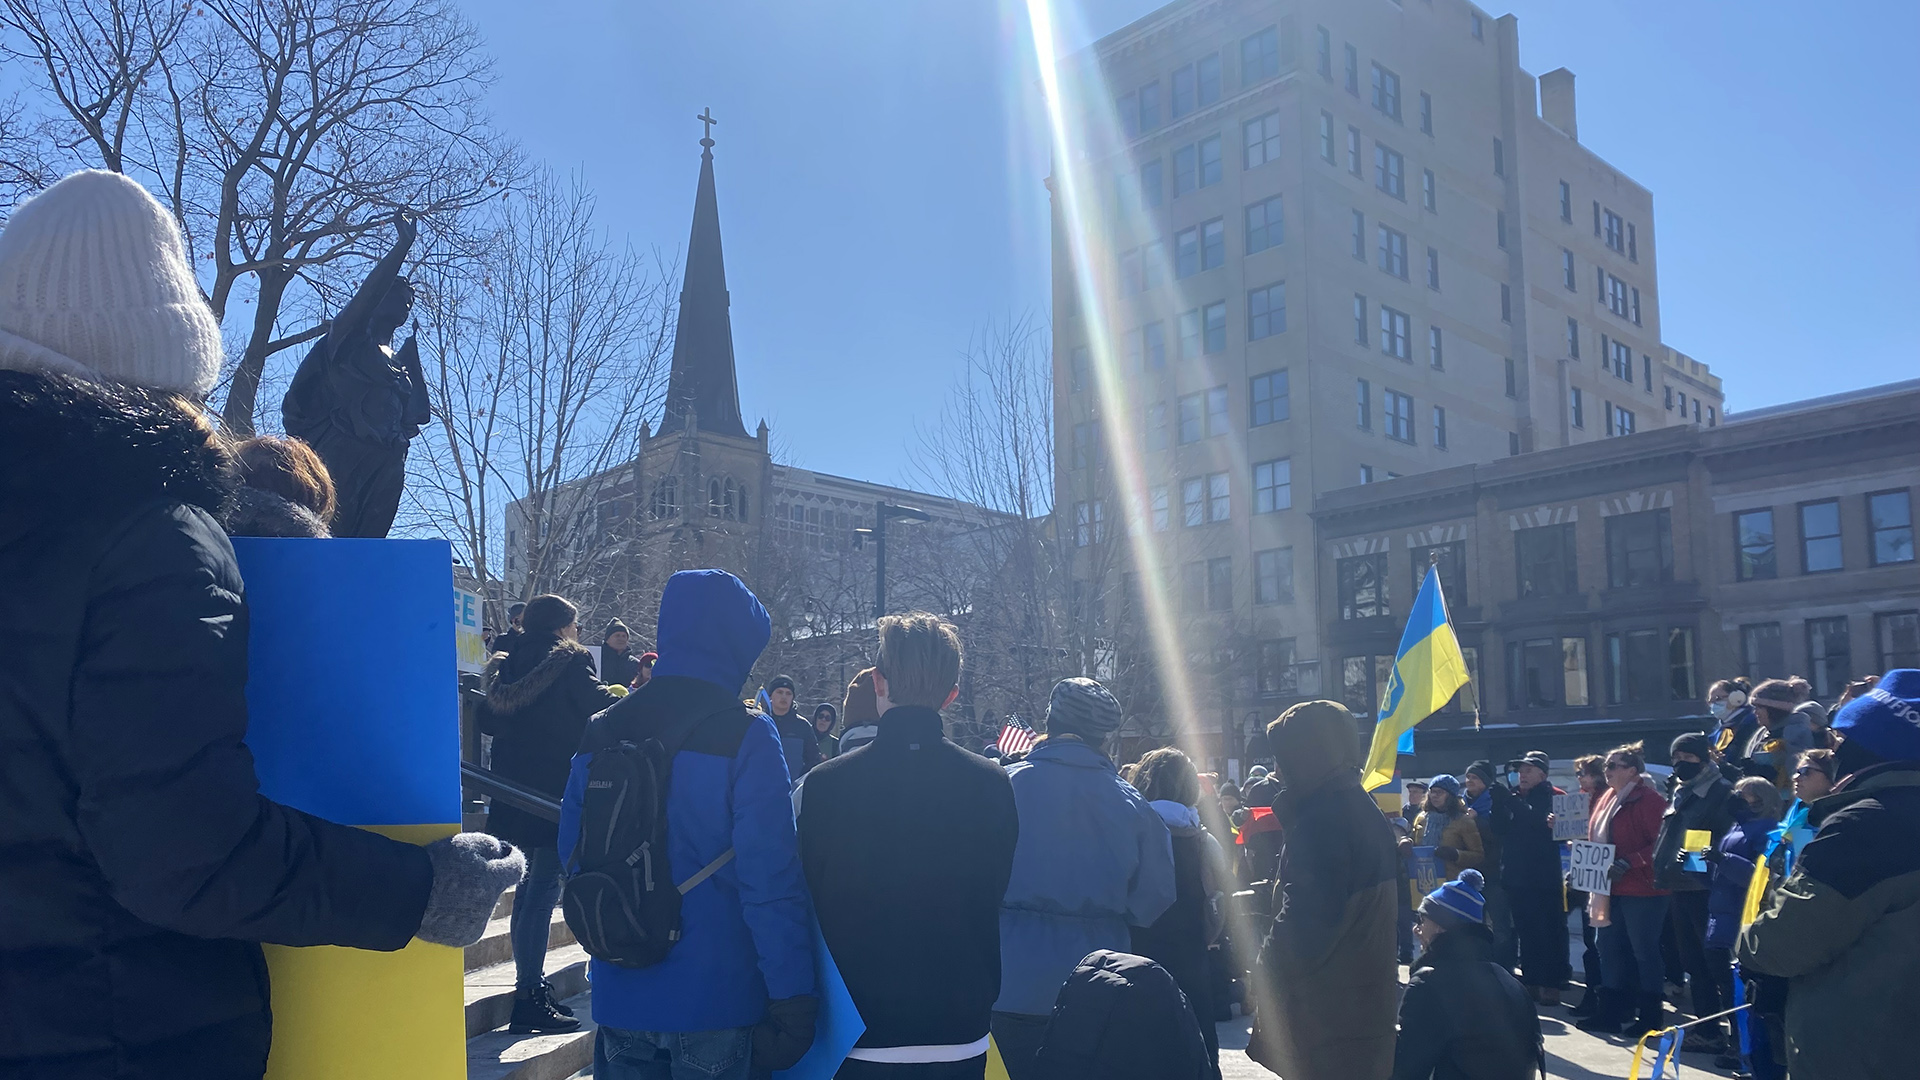 A sunbeam lens flare shines over an outdoor rally next to a statue, with protestors holding blue-and-yellow signs and flags, with buildings in the background.